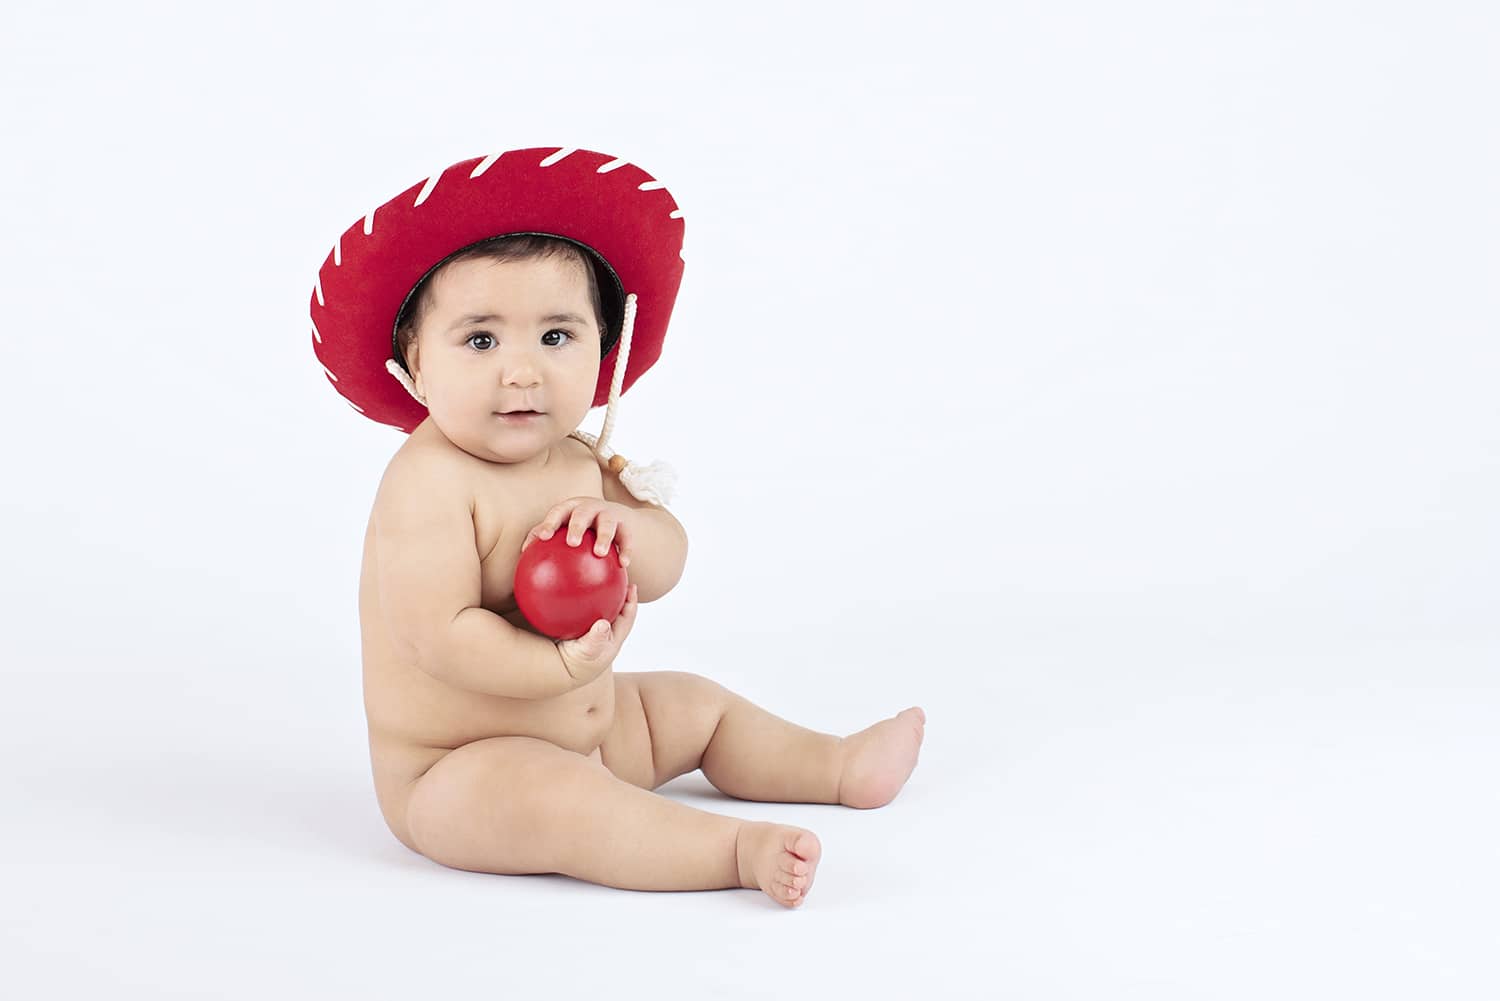 A six month old wearing a red cowboy hat holds a red ball.